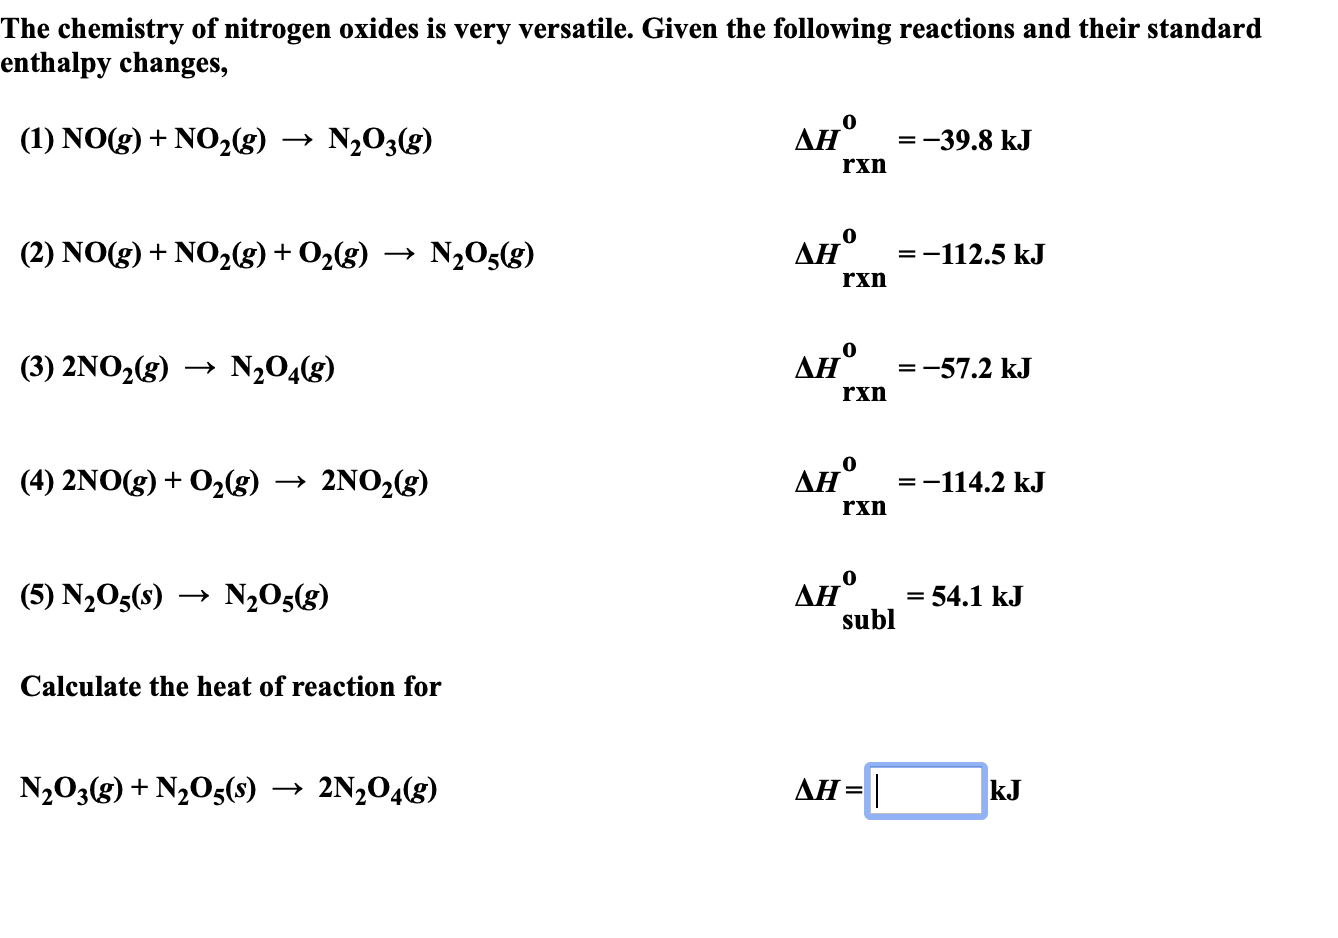 The chemistry of nitrogen oxides is very versatile. Given the following reactions and their standard
enthalpy changes,
Ан°
(1) NOg)NO2(g)
N203(g)
=-39.8 kJ
+
rxn
Ан°
(2) NO(g) NO2(g) + O2(g)
N205(g)
=-112.5 kJ
rxn
Ан°
N204(8)
(3) 2NO2(g)
-57.2 kJ
rxn
Дн" %3-114.2 kJ
(4) 2NO(g) 02g)
2NO2(g)
=
rxn
Ан°
subl
(5) N205(s)
N205(g)
= 54.1 kJ
Calculate the heat of reaction for
AH
N203(g)N205(s)
2N204(g)
kJ
